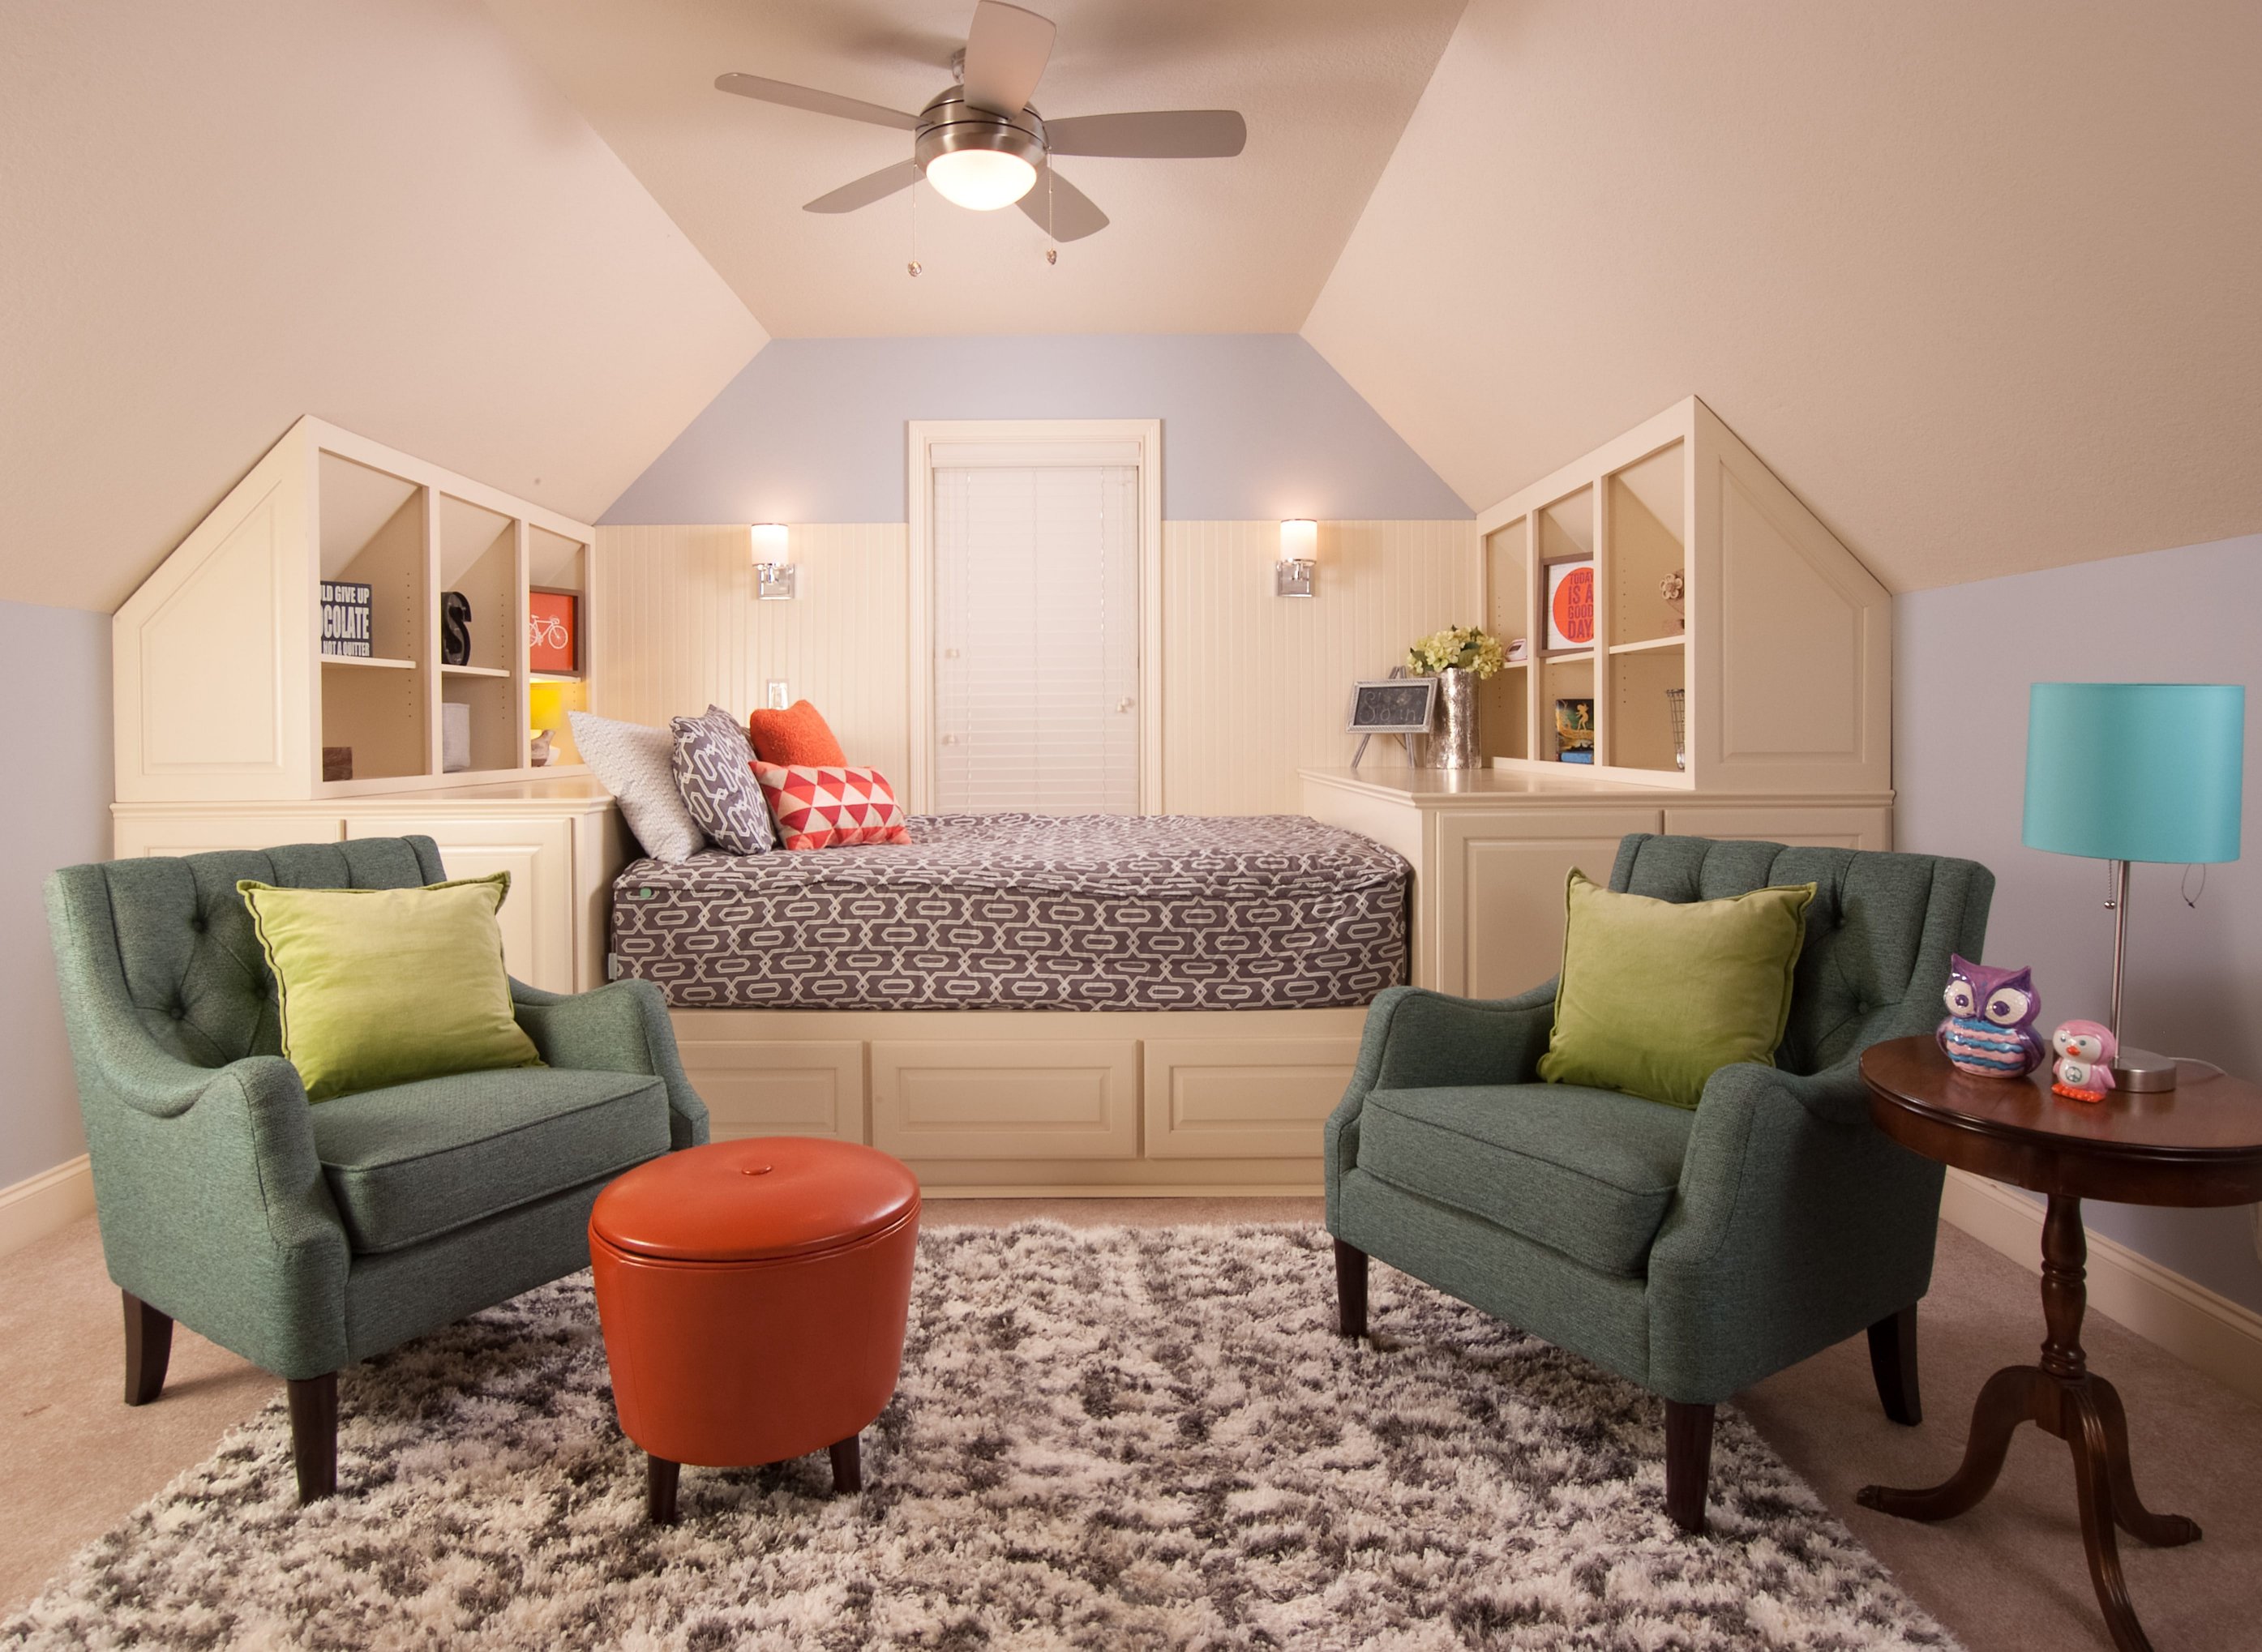 Top 8 Questions About Decorating Children’s Rooms